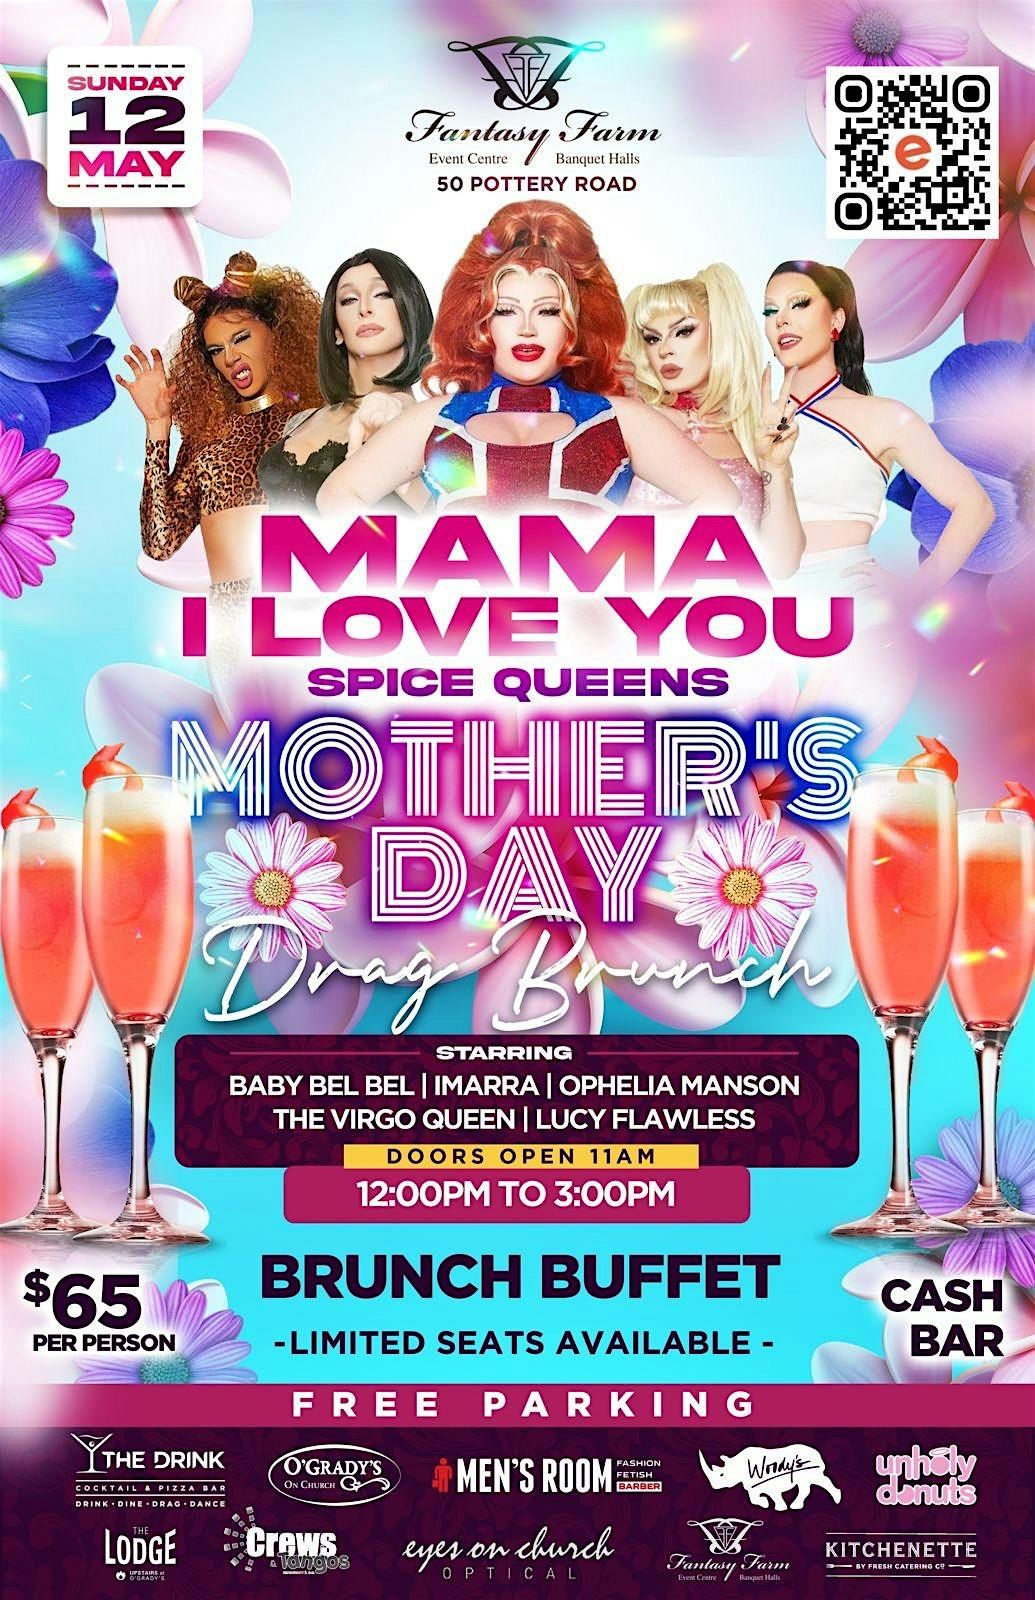 Mama, I love you - Spice Queens Mother's Day Drag Brunch